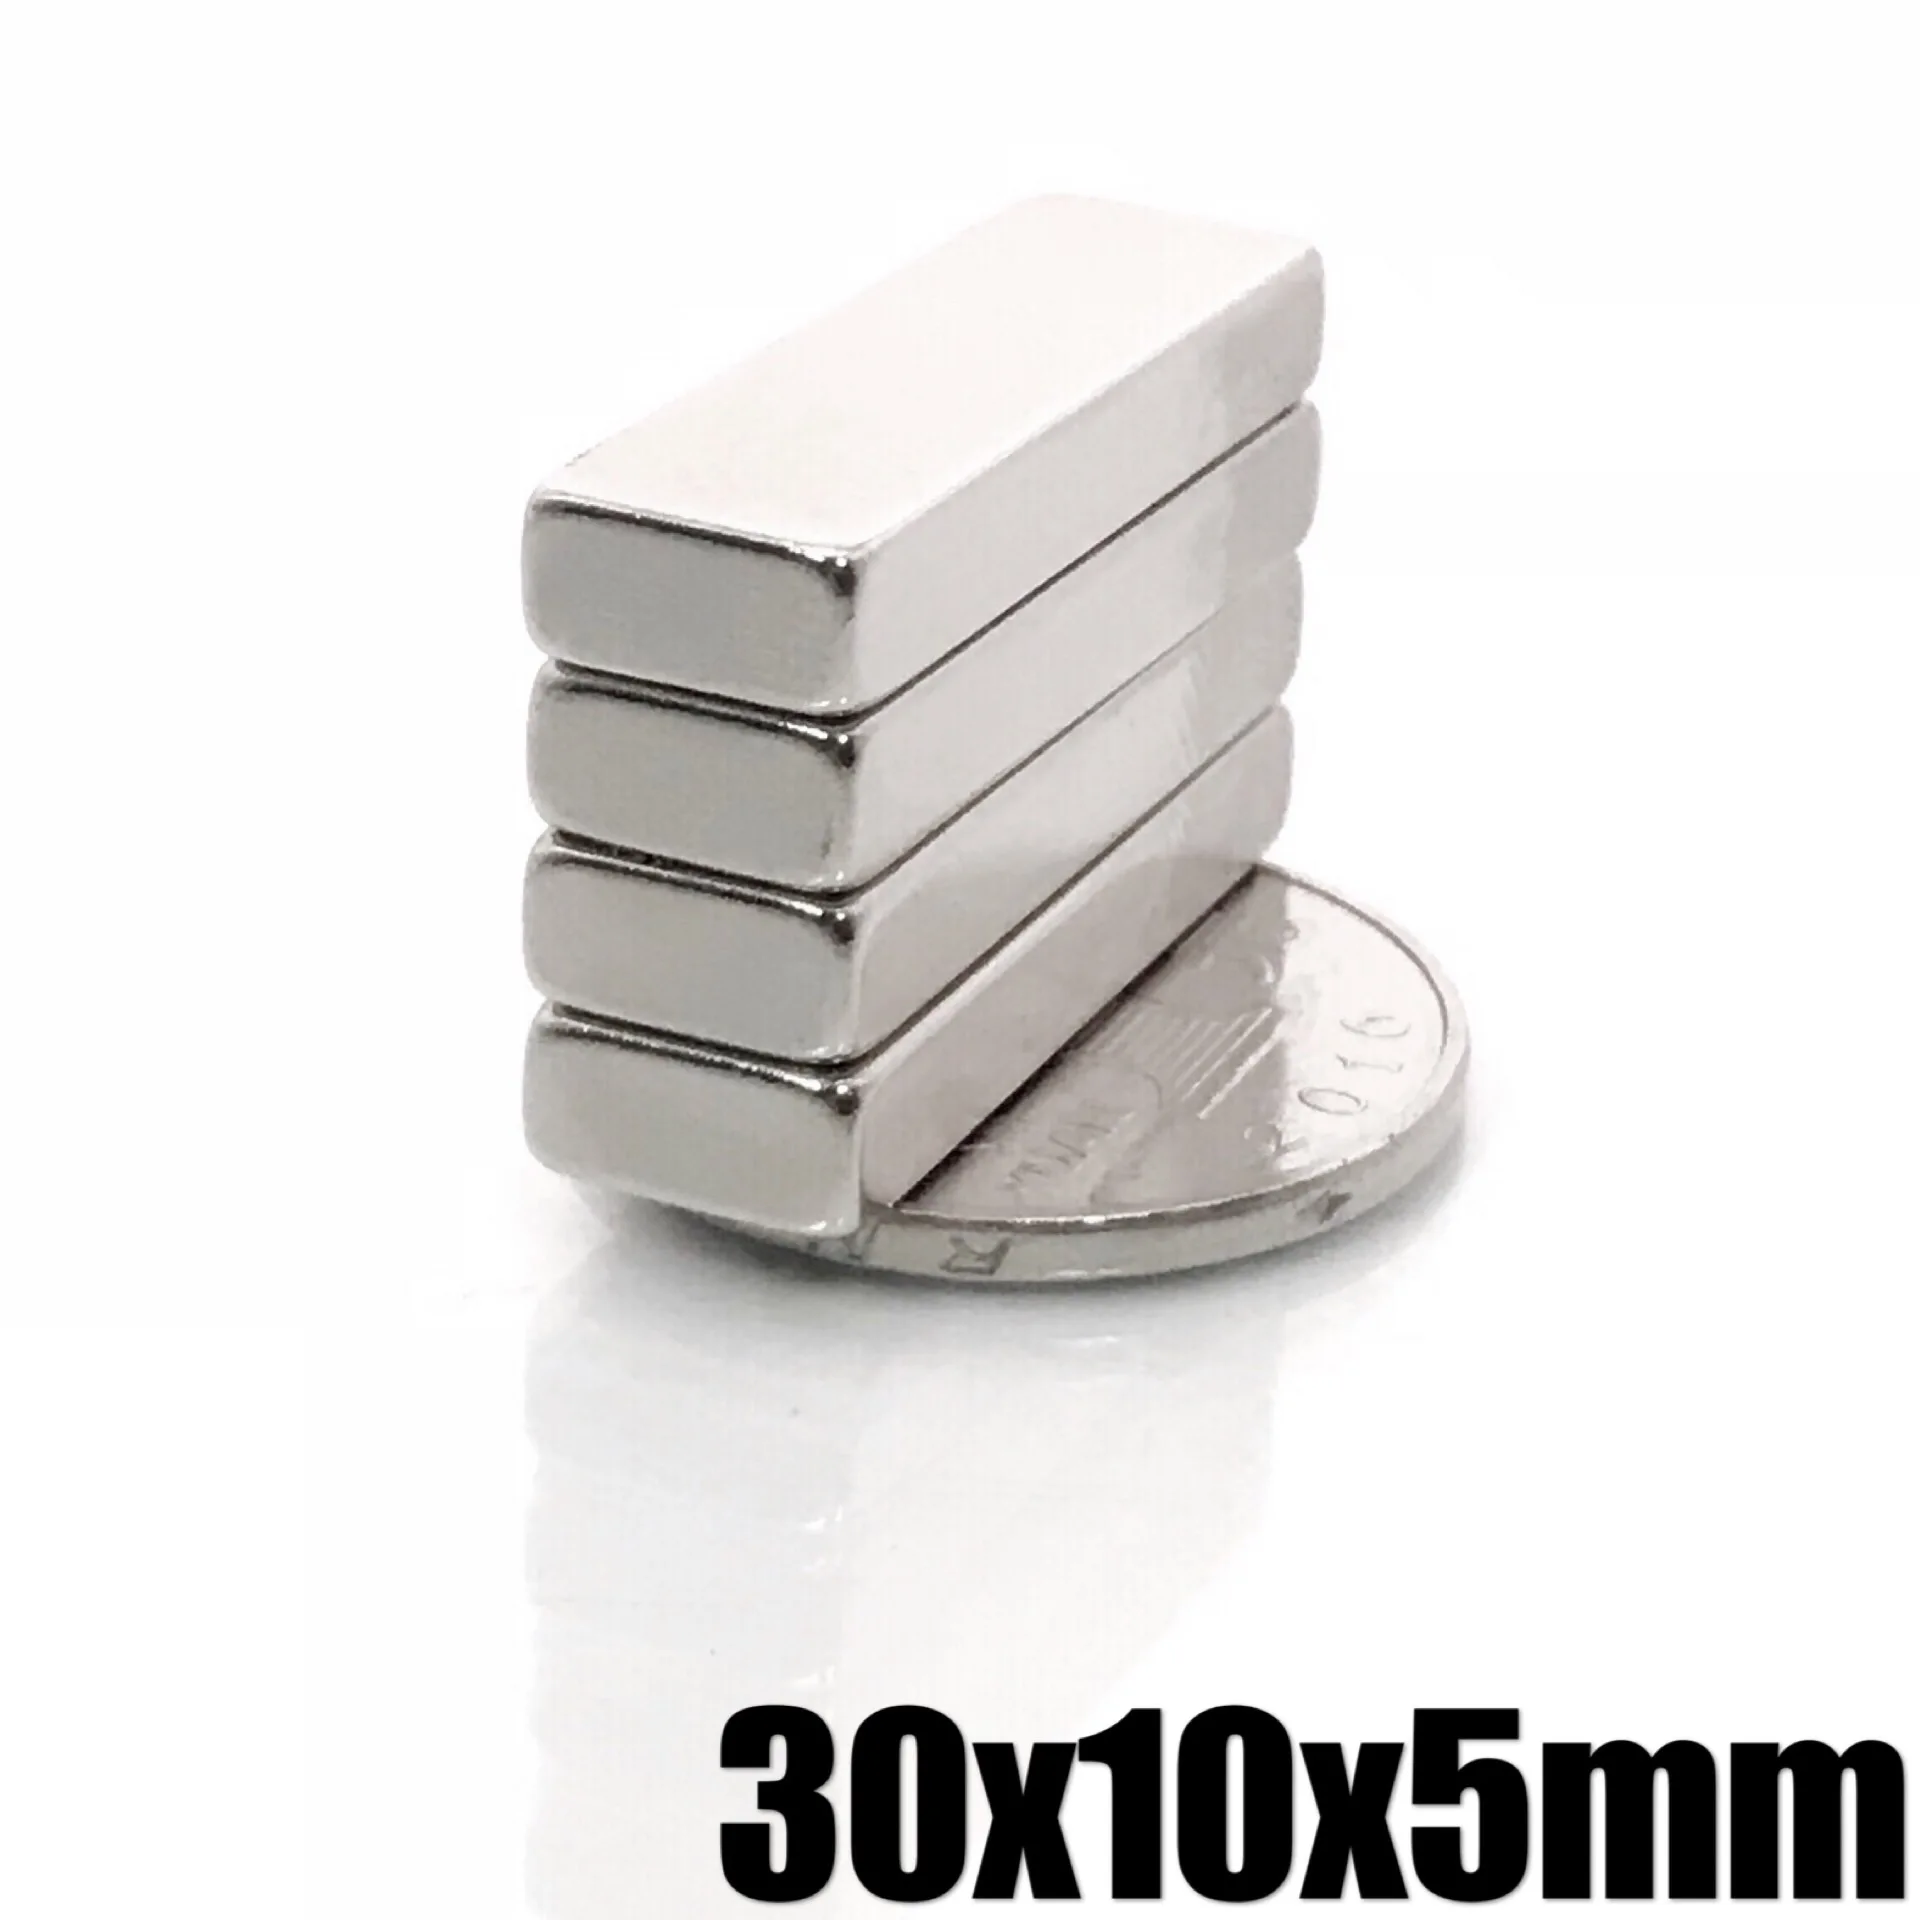 10X N52-5mm*10mm Rare Earth Magnets Neodymium Building Magnets 